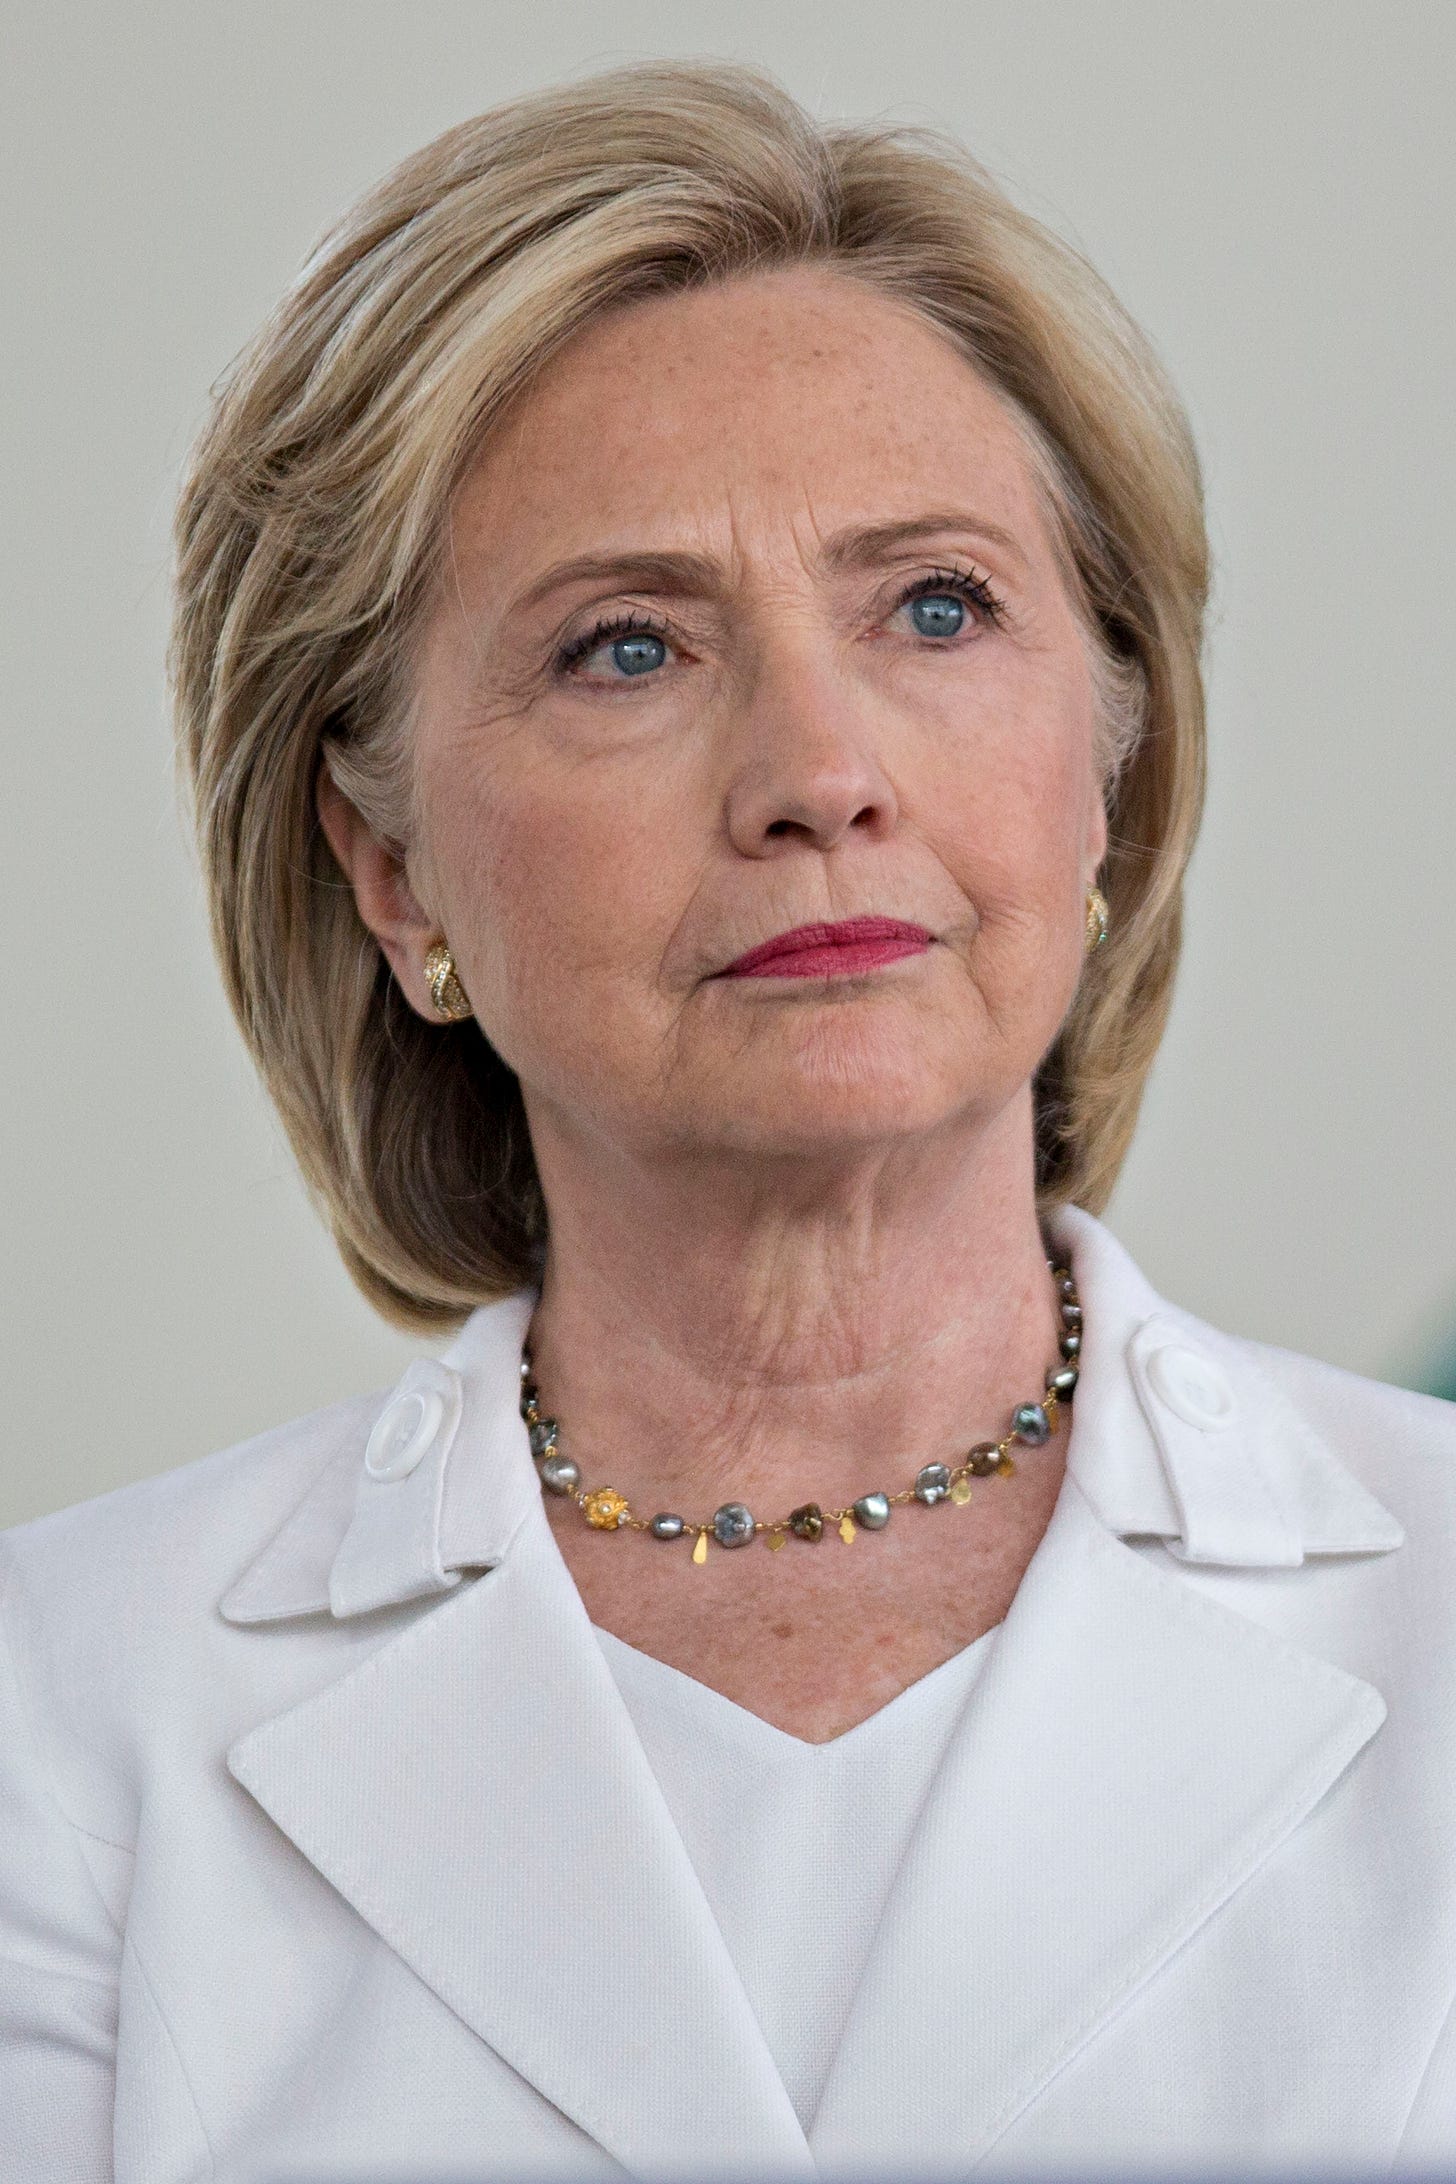 Hillary Clinton, former U.S. secretary of state and 2016 Democratic presidential candidate, listens during her introduction at an event in Ankeny, Iowa, on Aug. 26, 2015. (Daniel Acker—Bloomberg/Getty Images)